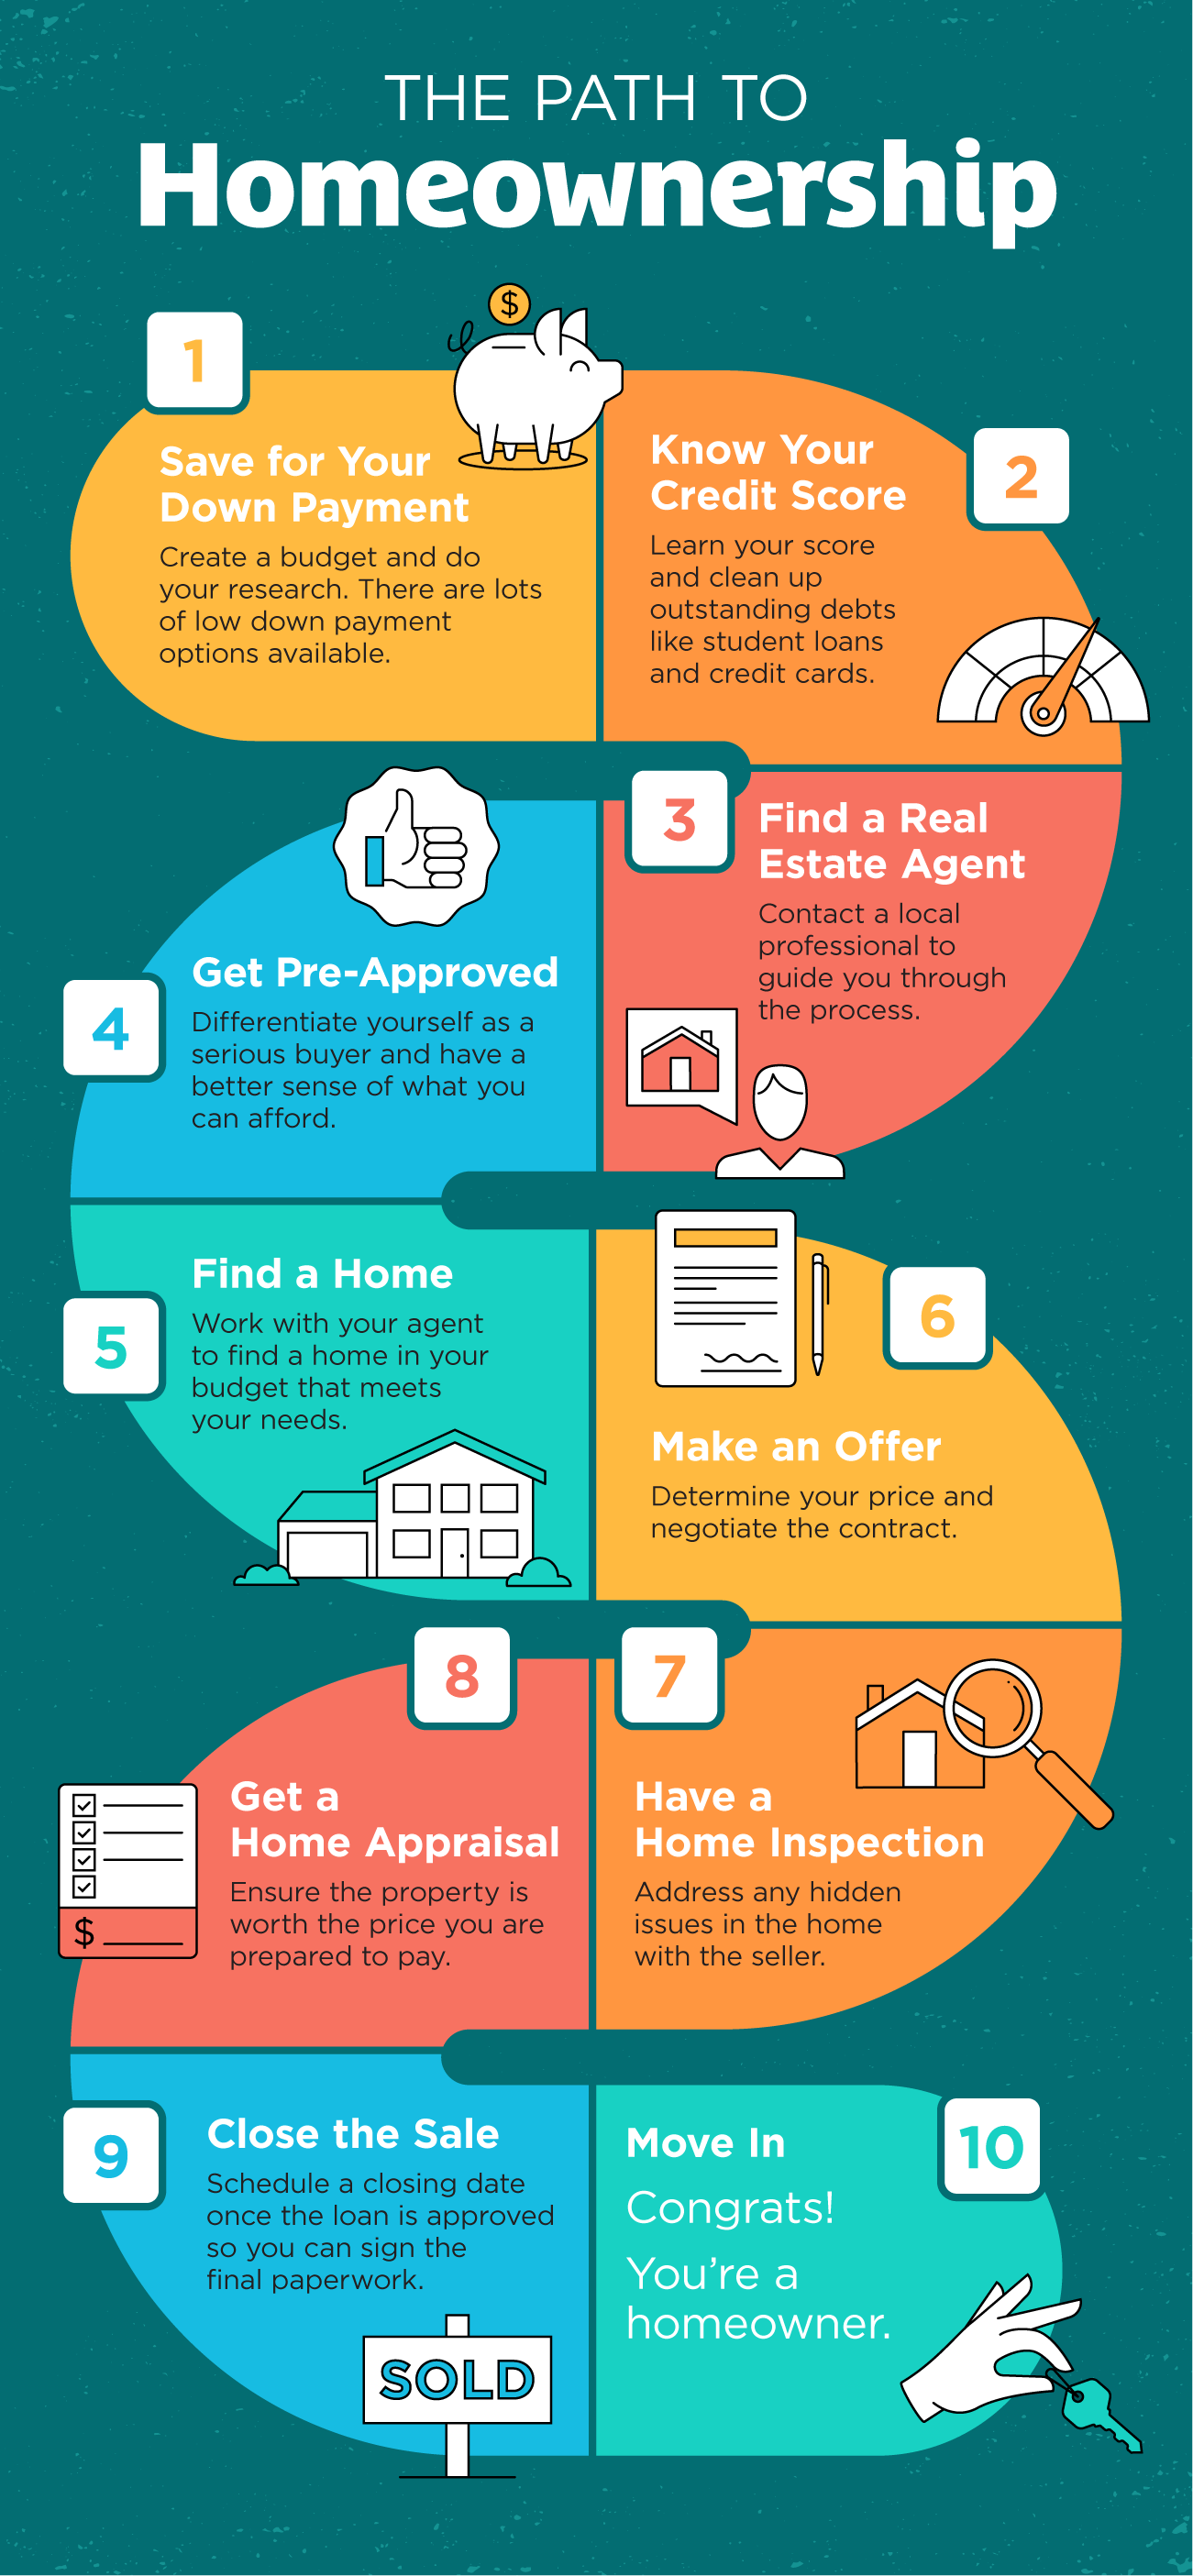 The Path to Homeownership [INFOGRAPHIC]